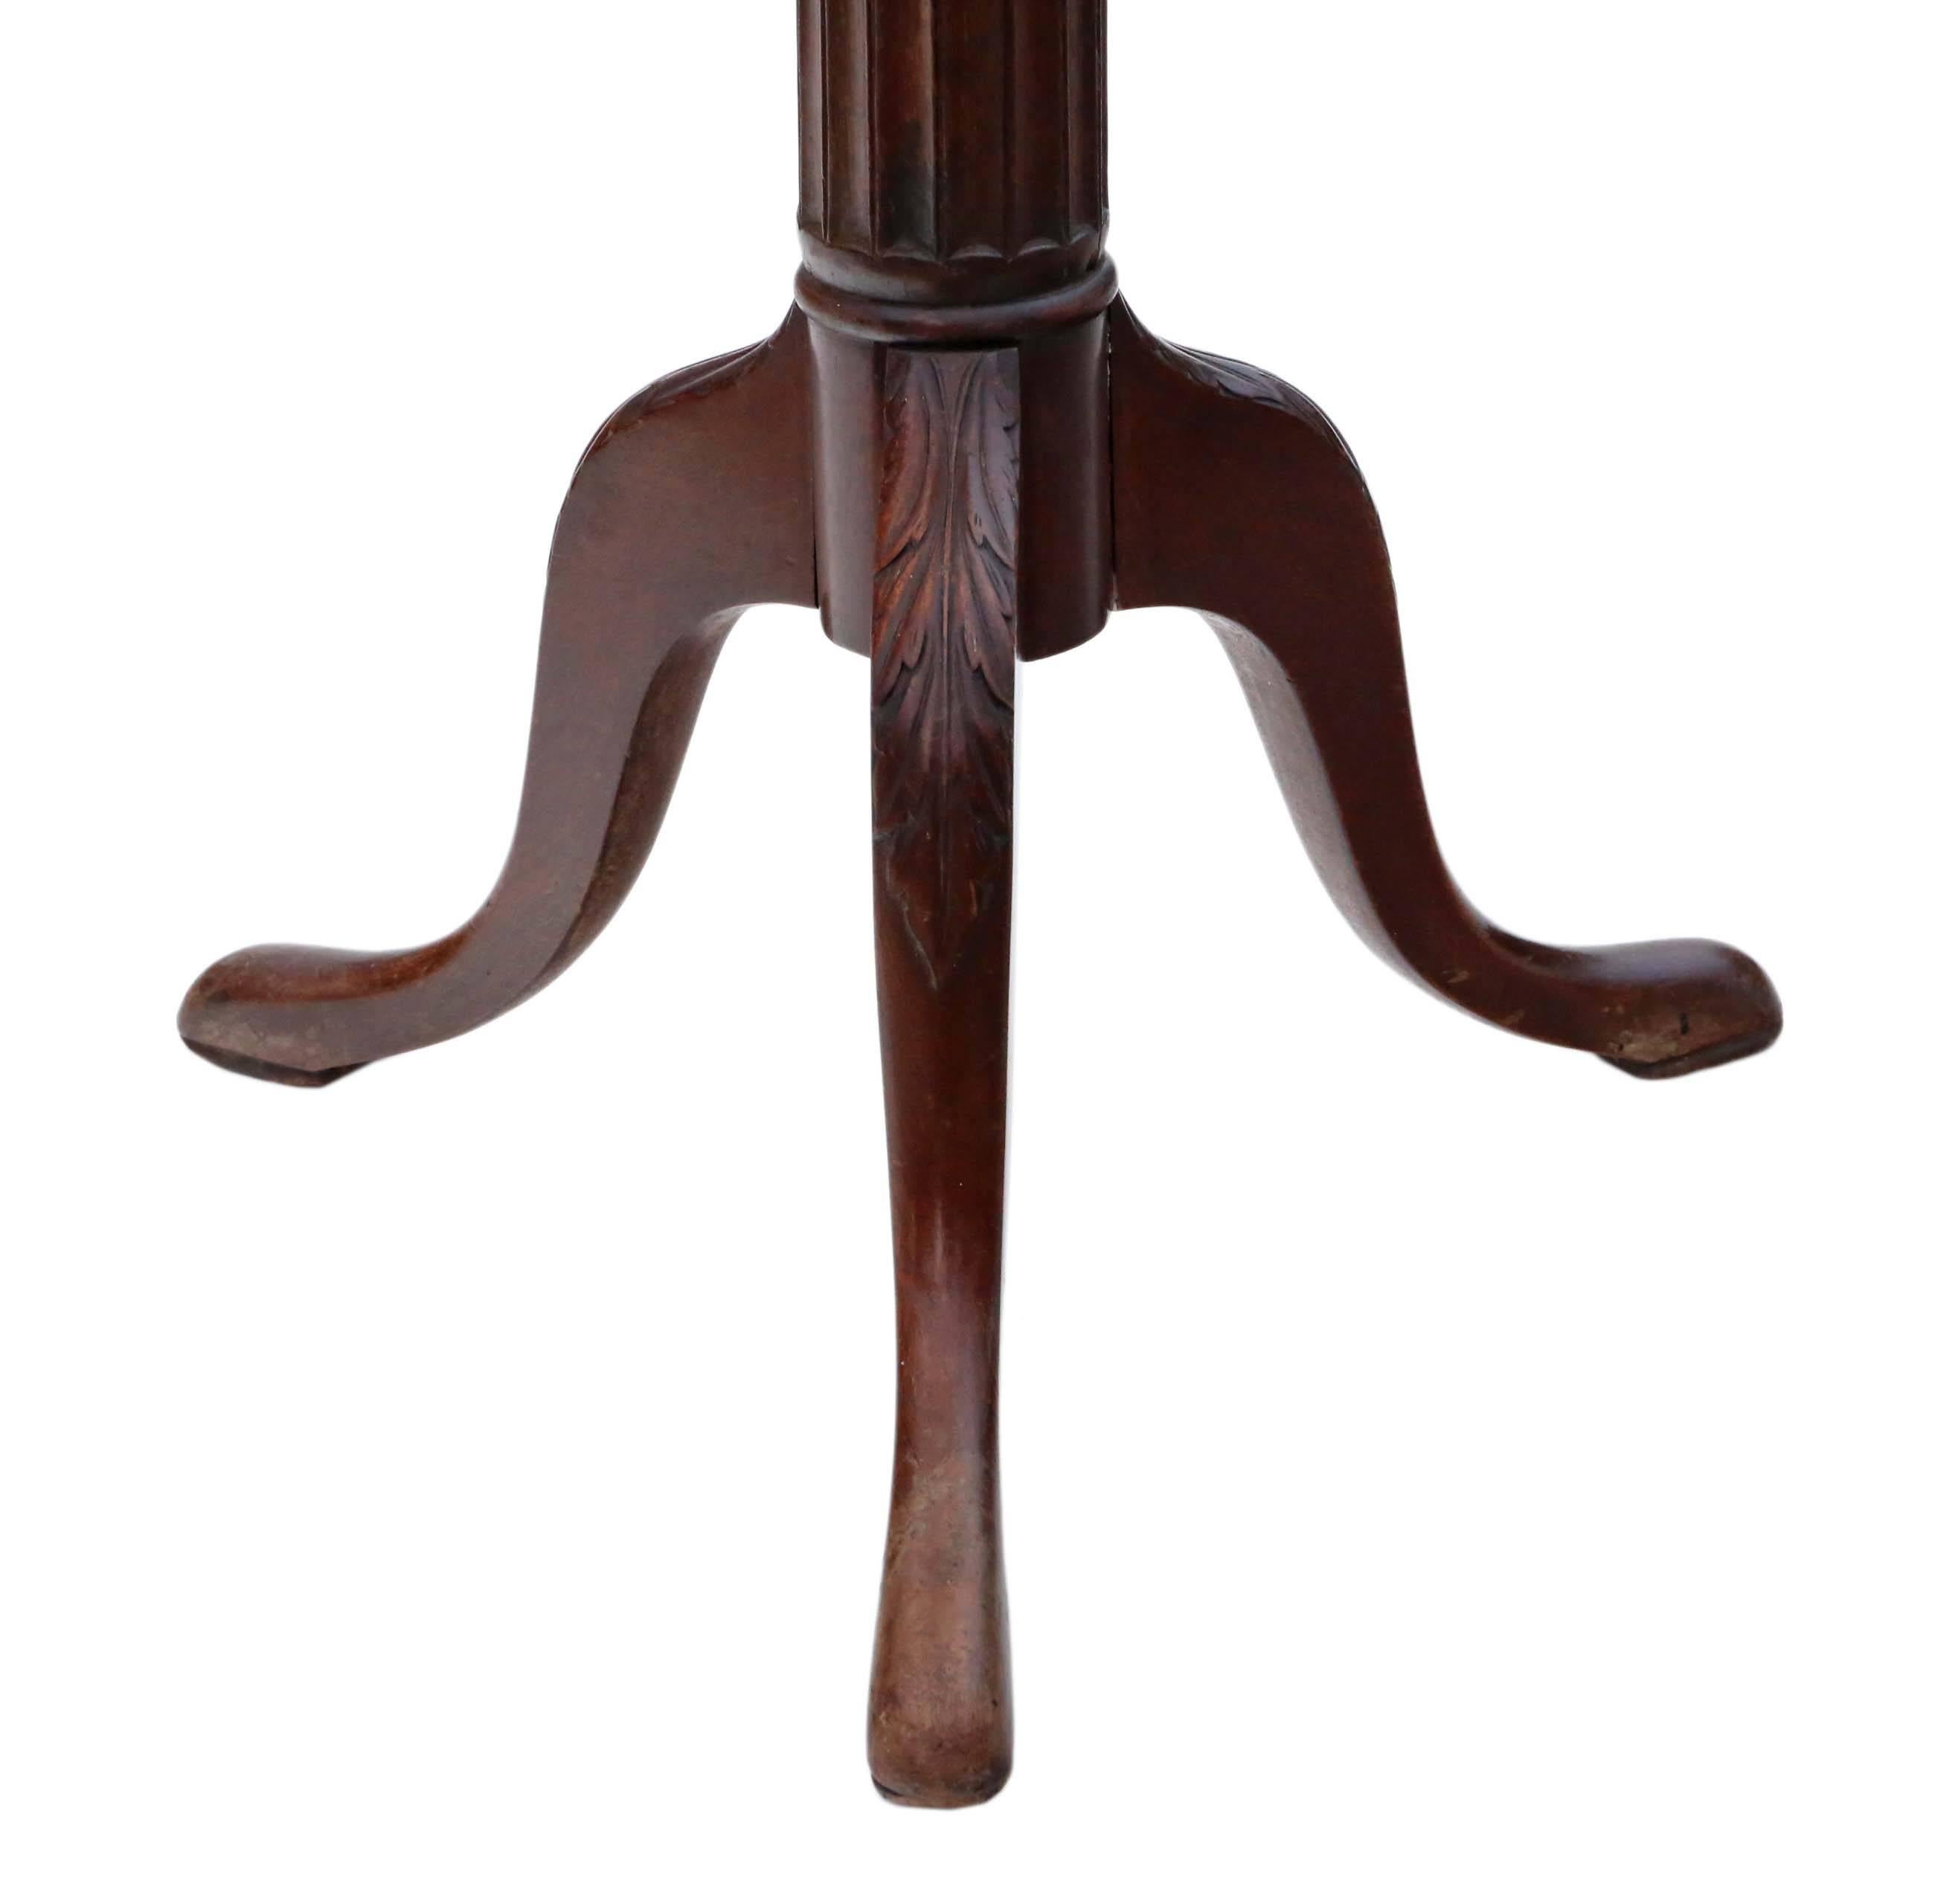 Antique Mahogany Torchiere Jardinière Pedestal Stand Plant Table In Good Condition For Sale In Wisbech, Walton Wisbech